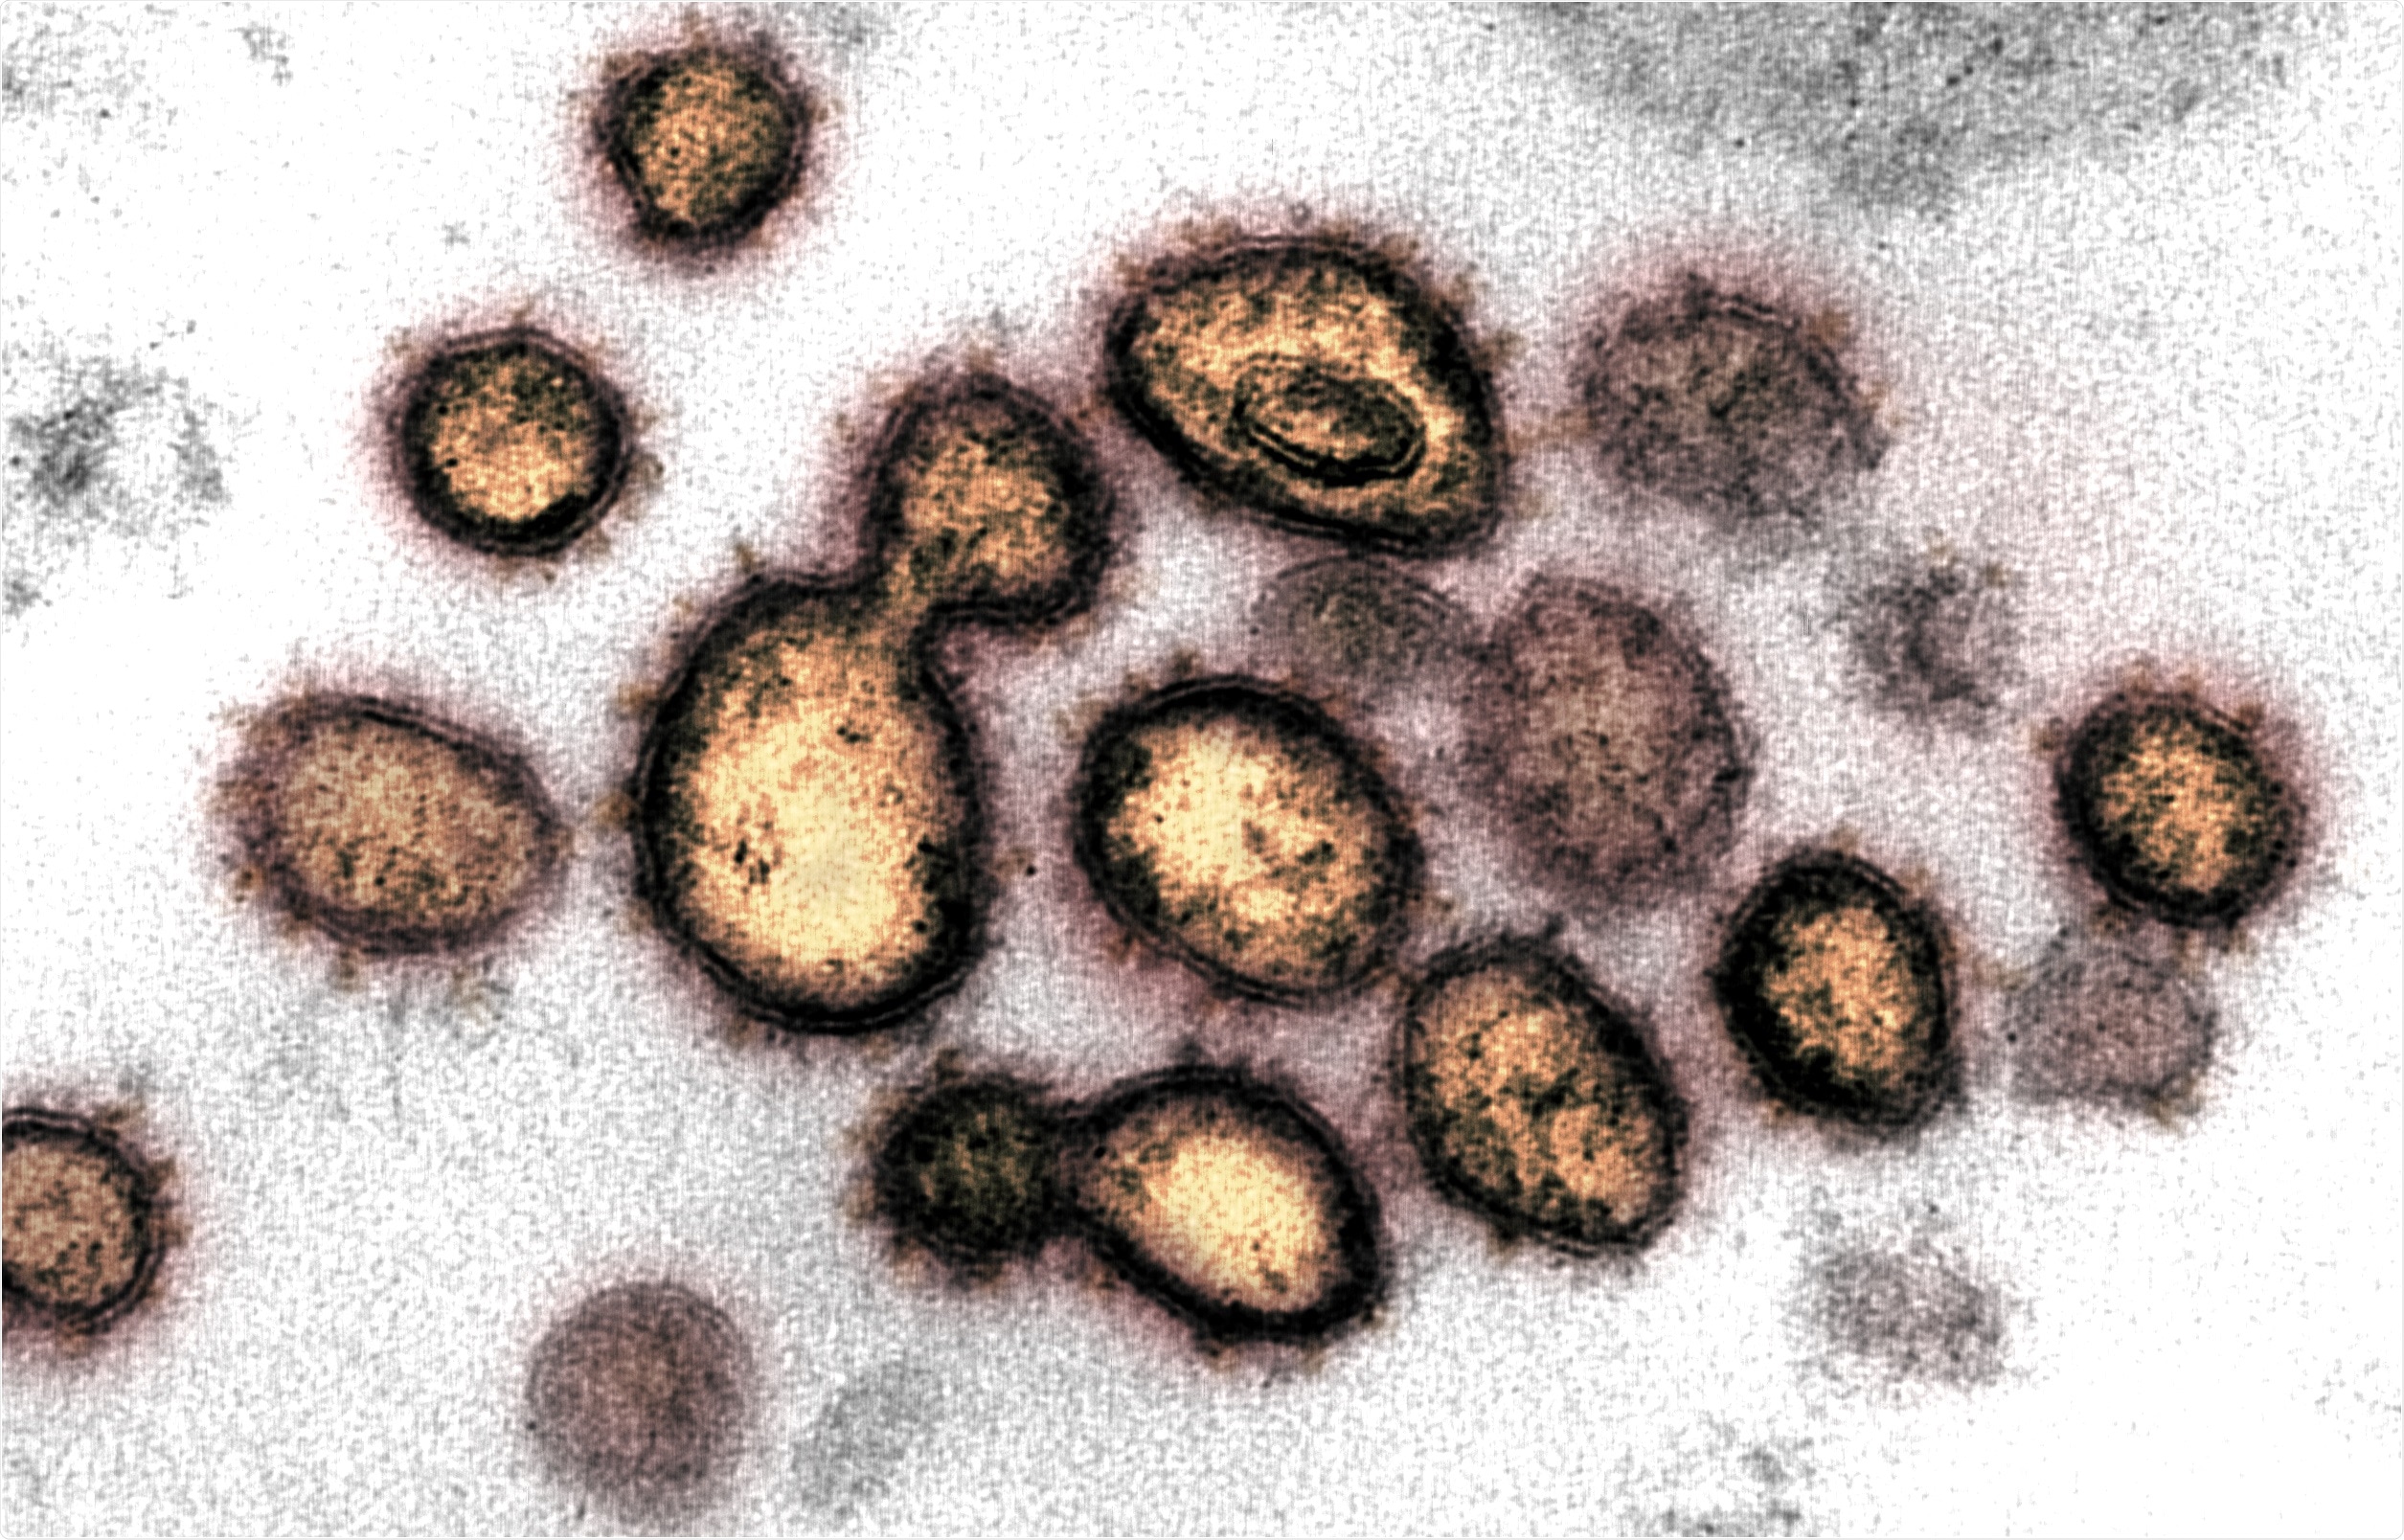 This transmission electron microscope image shows SARS-CoV-2, the virus that causes COVID-19, isolated from a patient in the U.S. Virus particles are shown emerging from the surface of cells cultured in the lab. The spikes on the outer edge of the virus particles give coronaviruses their name, crown-like. Image captured and colorized at NIAID